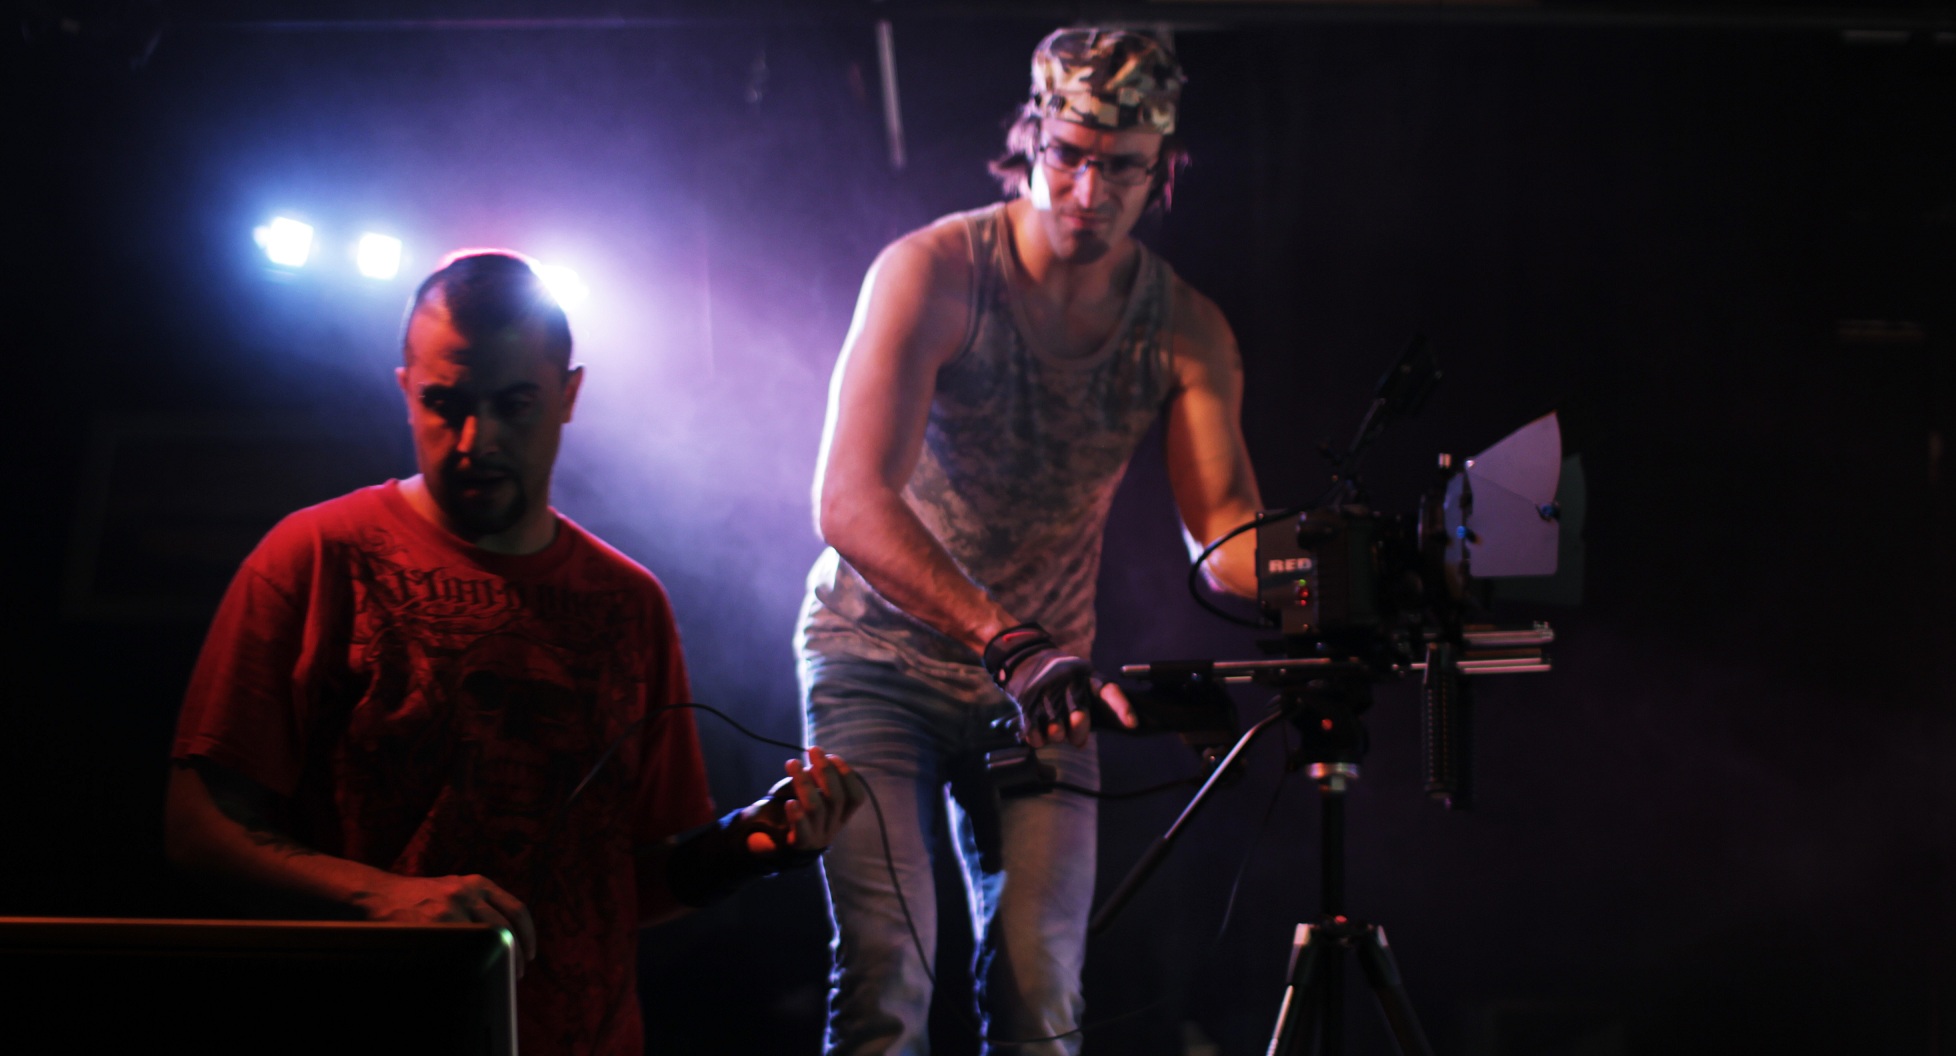 Music Video Production